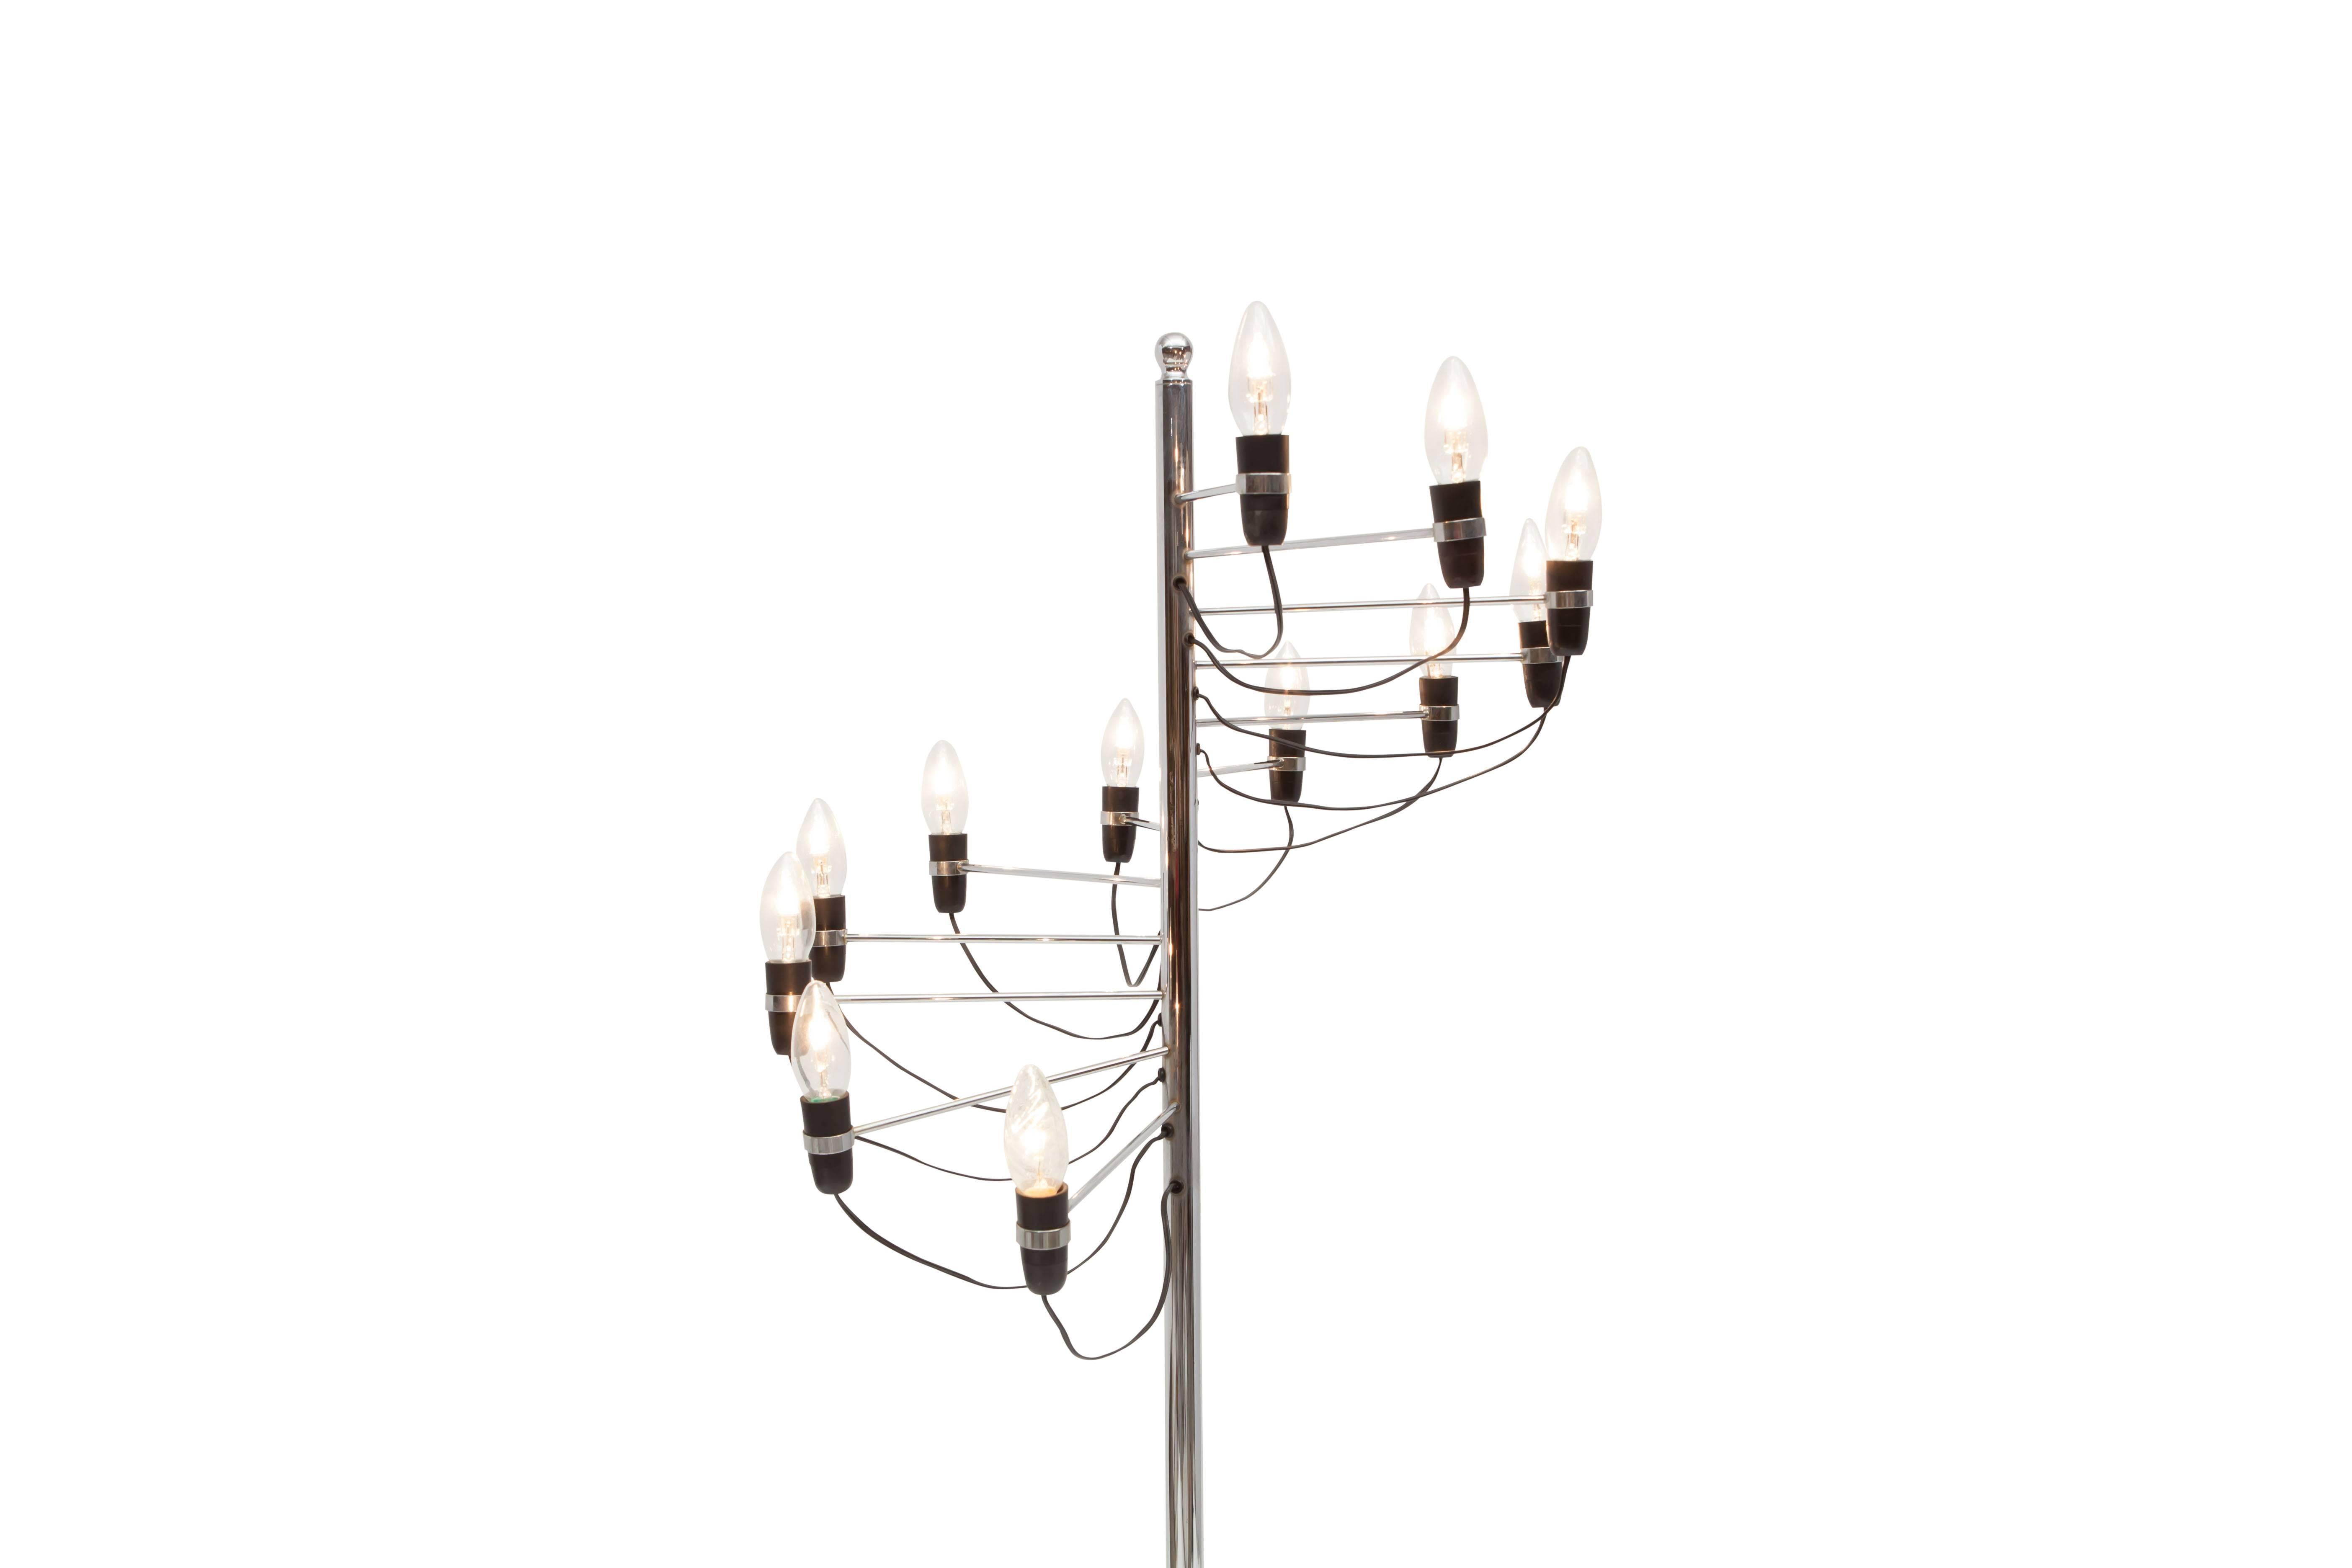 Spiraling floor lamp in chromed steel
manufactured by Flos and designed by Gino Sarfatti.
Italy, 1980s
Measure: H 140 cm x D 55 cm.